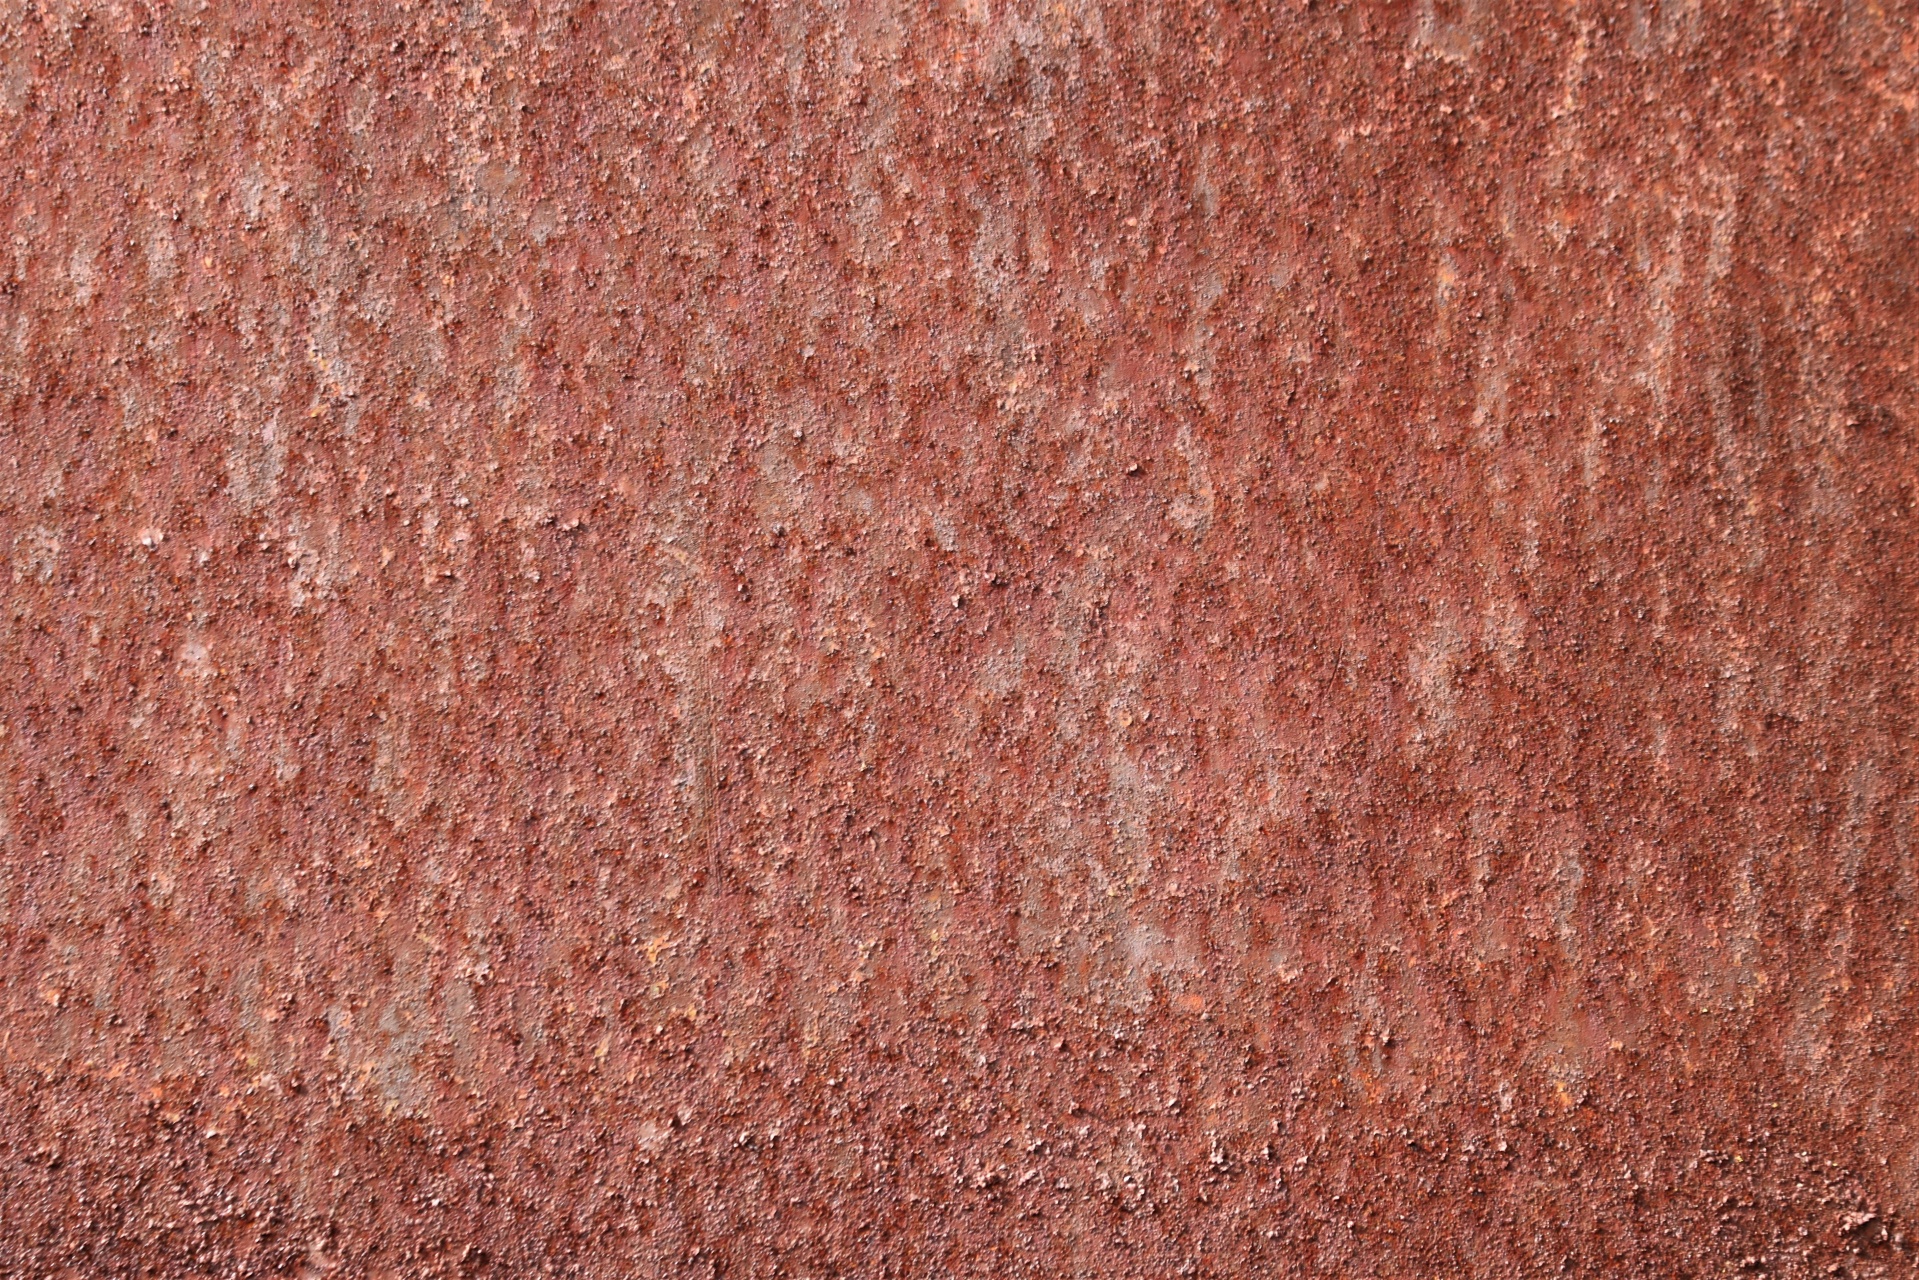 Rusted Metal Abstract Background